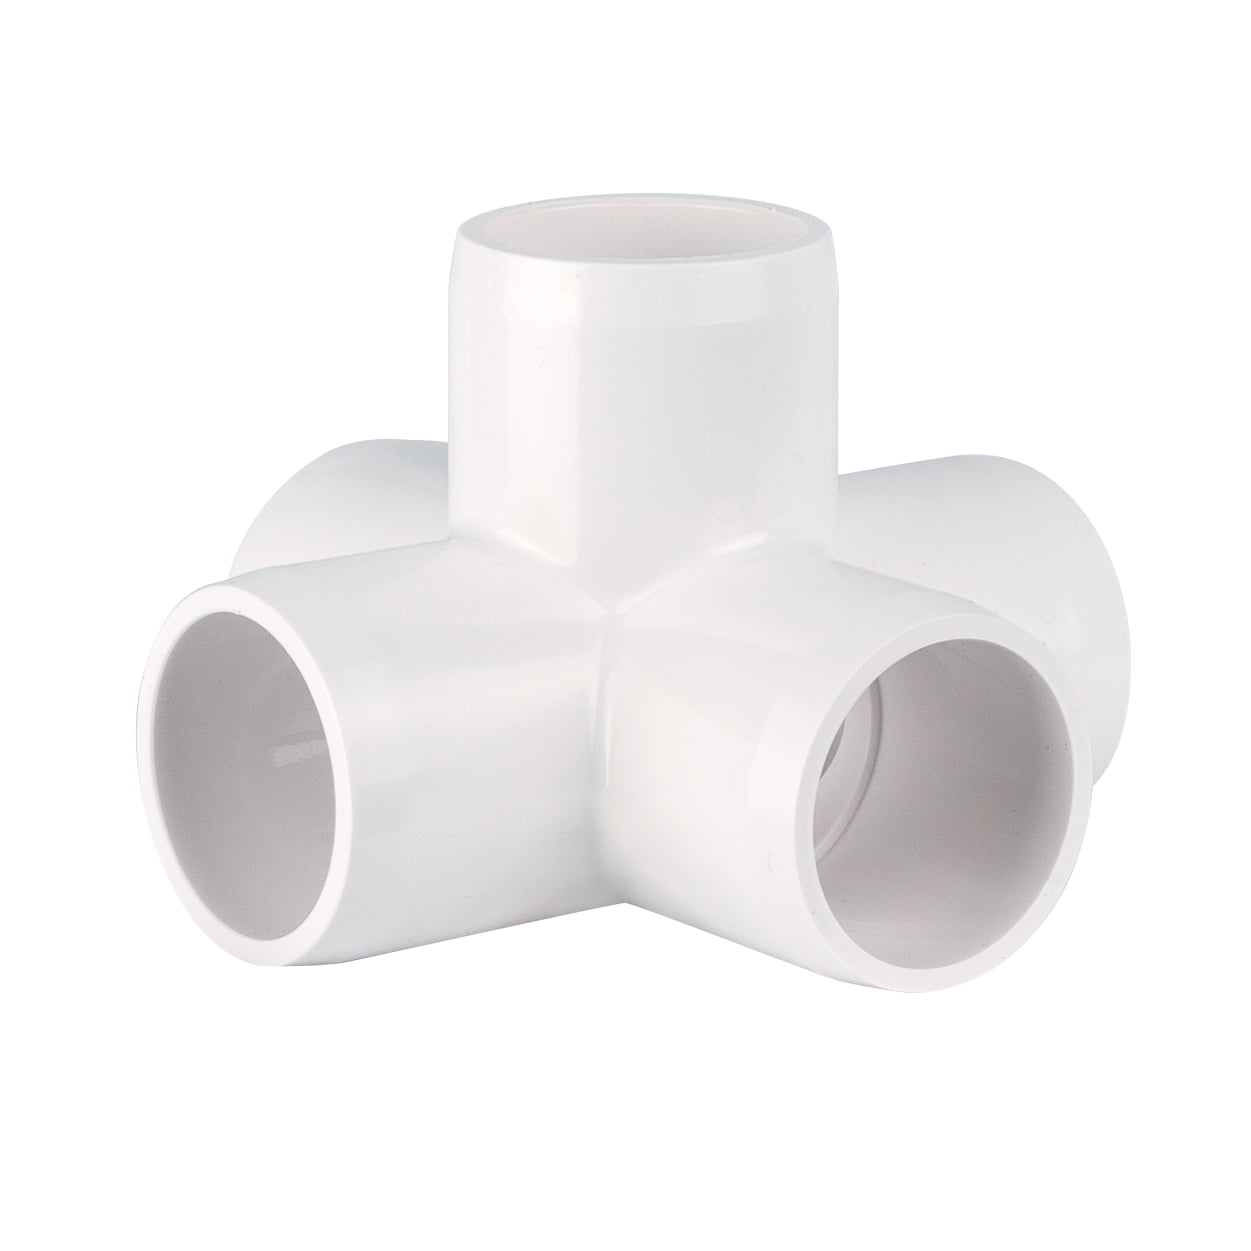 52-f 0.75 In. 5 Way X Pvc Pipe Fitting